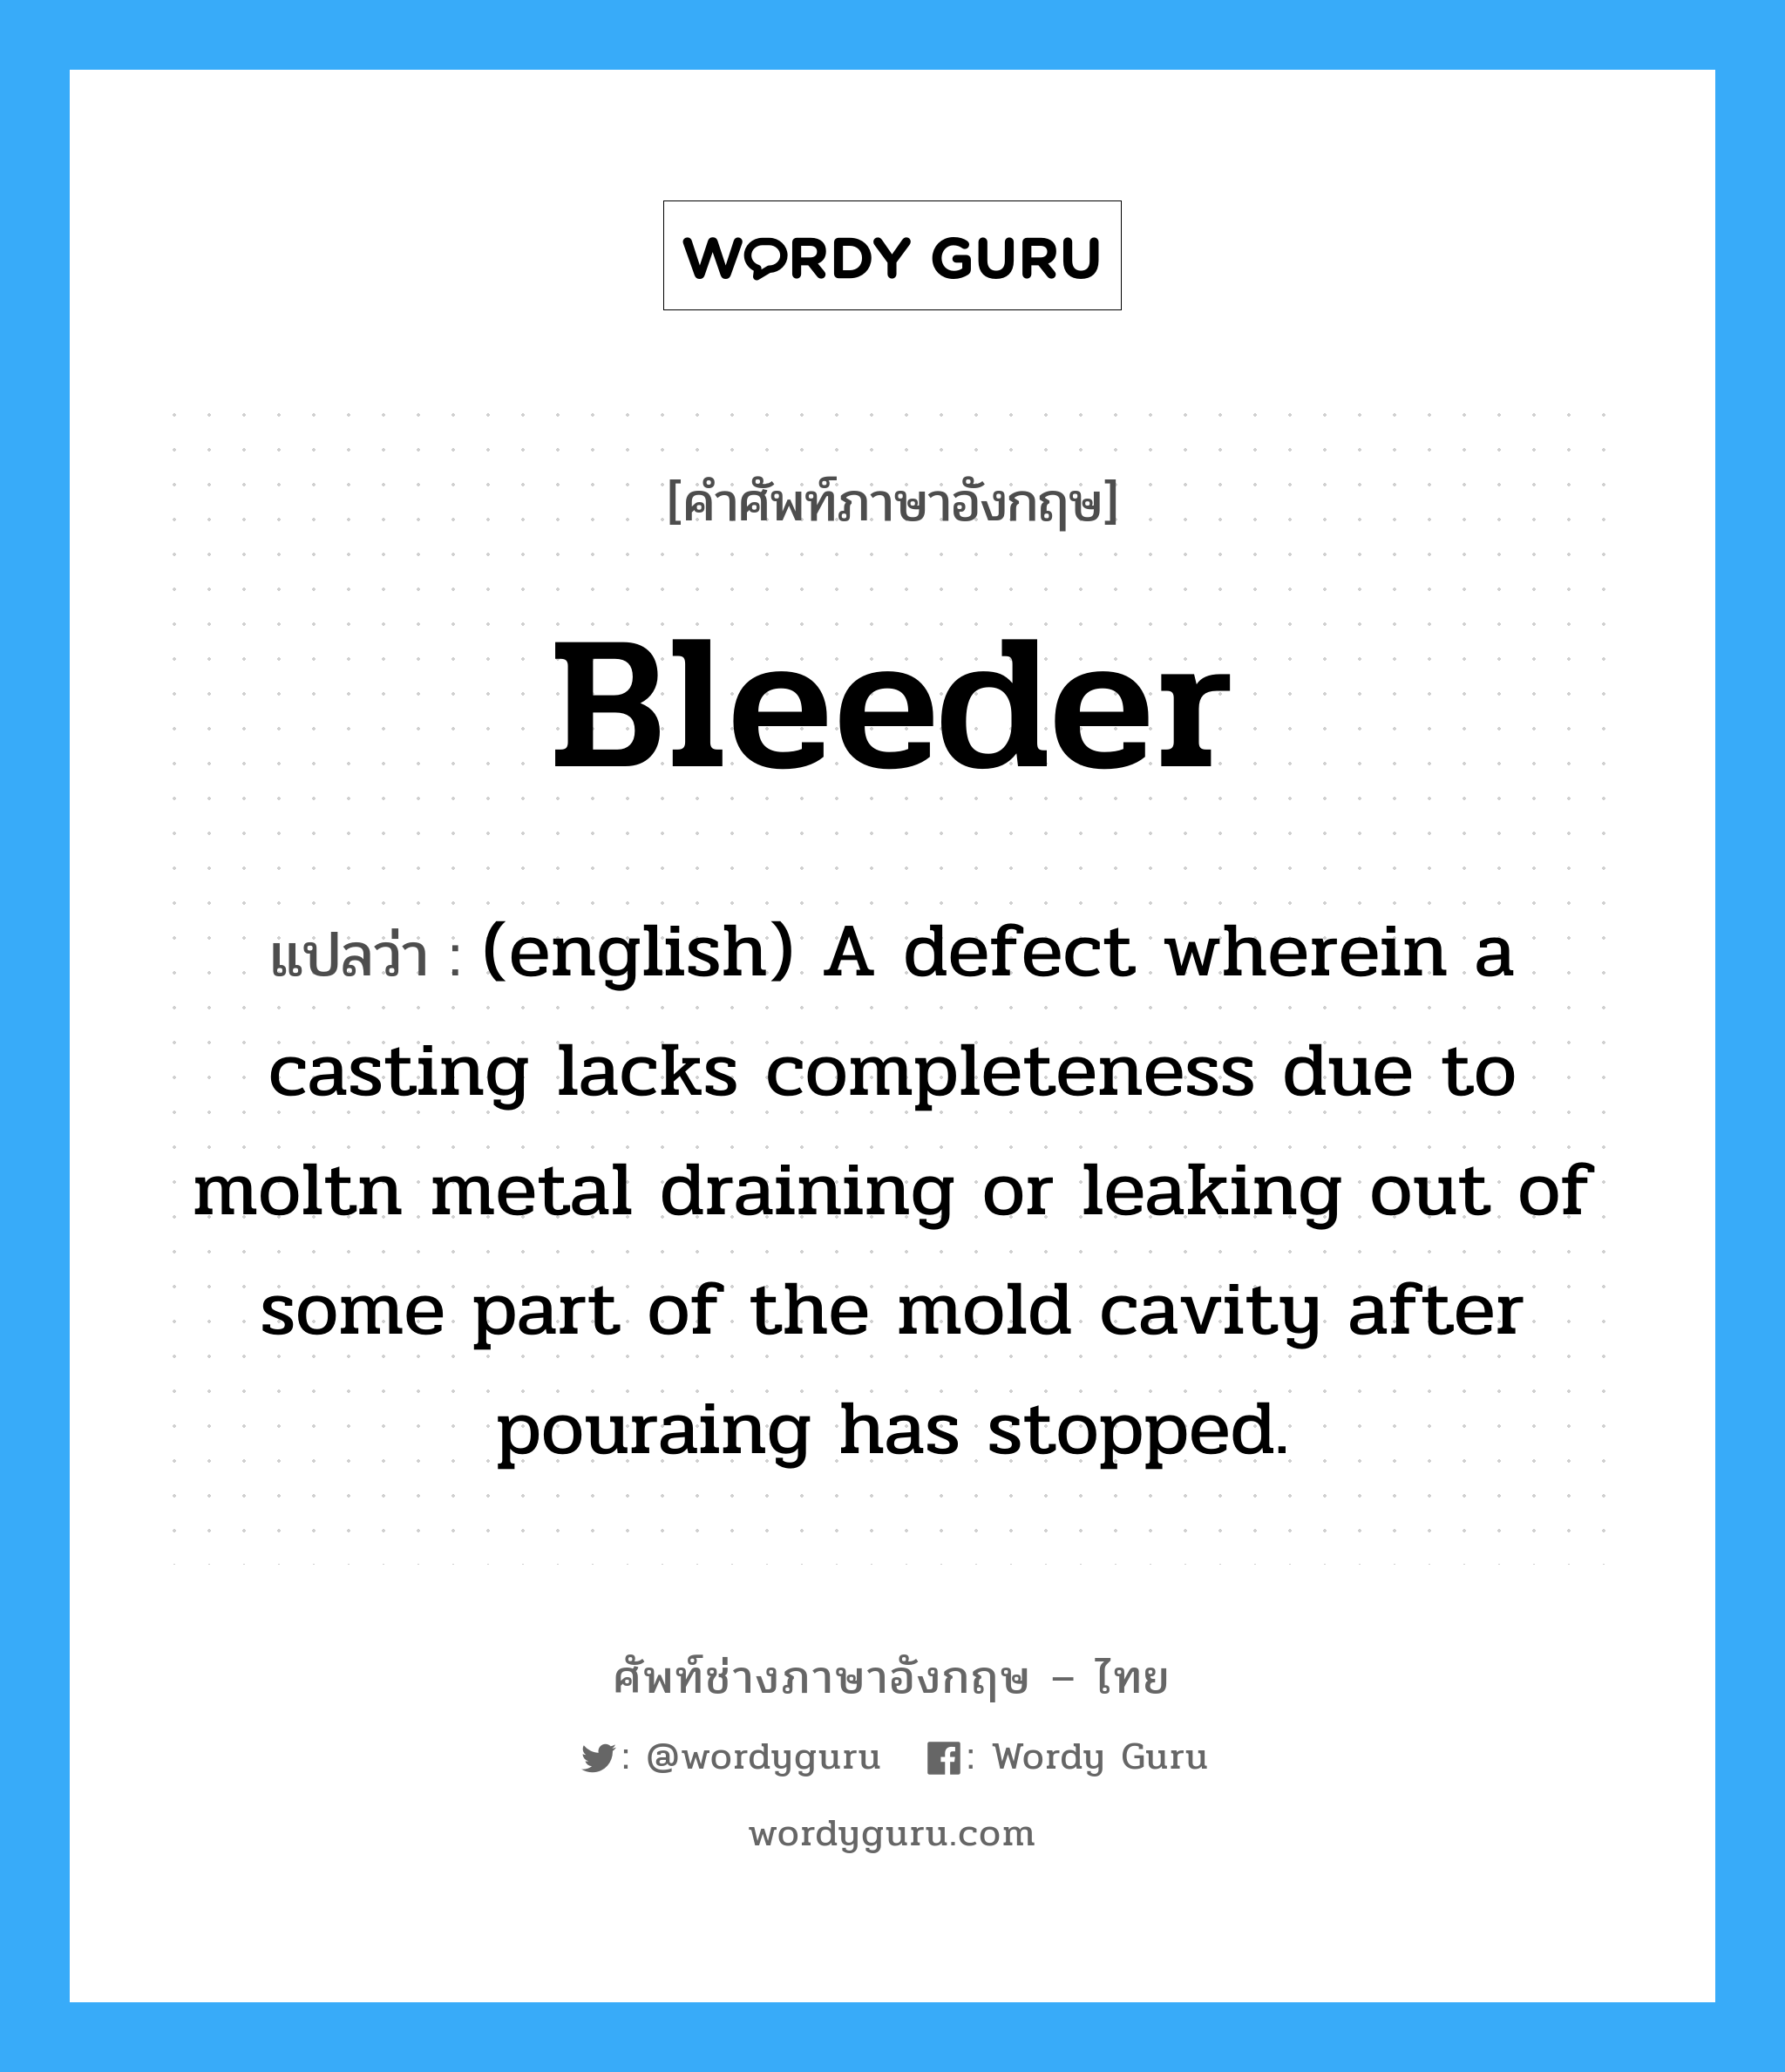 Bleeder แปลว่า?, คำศัพท์ช่างภาษาอังกฤษ - ไทย Bleeder คำศัพท์ภาษาอังกฤษ Bleeder แปลว่า (english) A defect wherein a casting lacks completeness due to moltn metal draining or leaking out of some part of the mold cavity after pouraing has stopped.